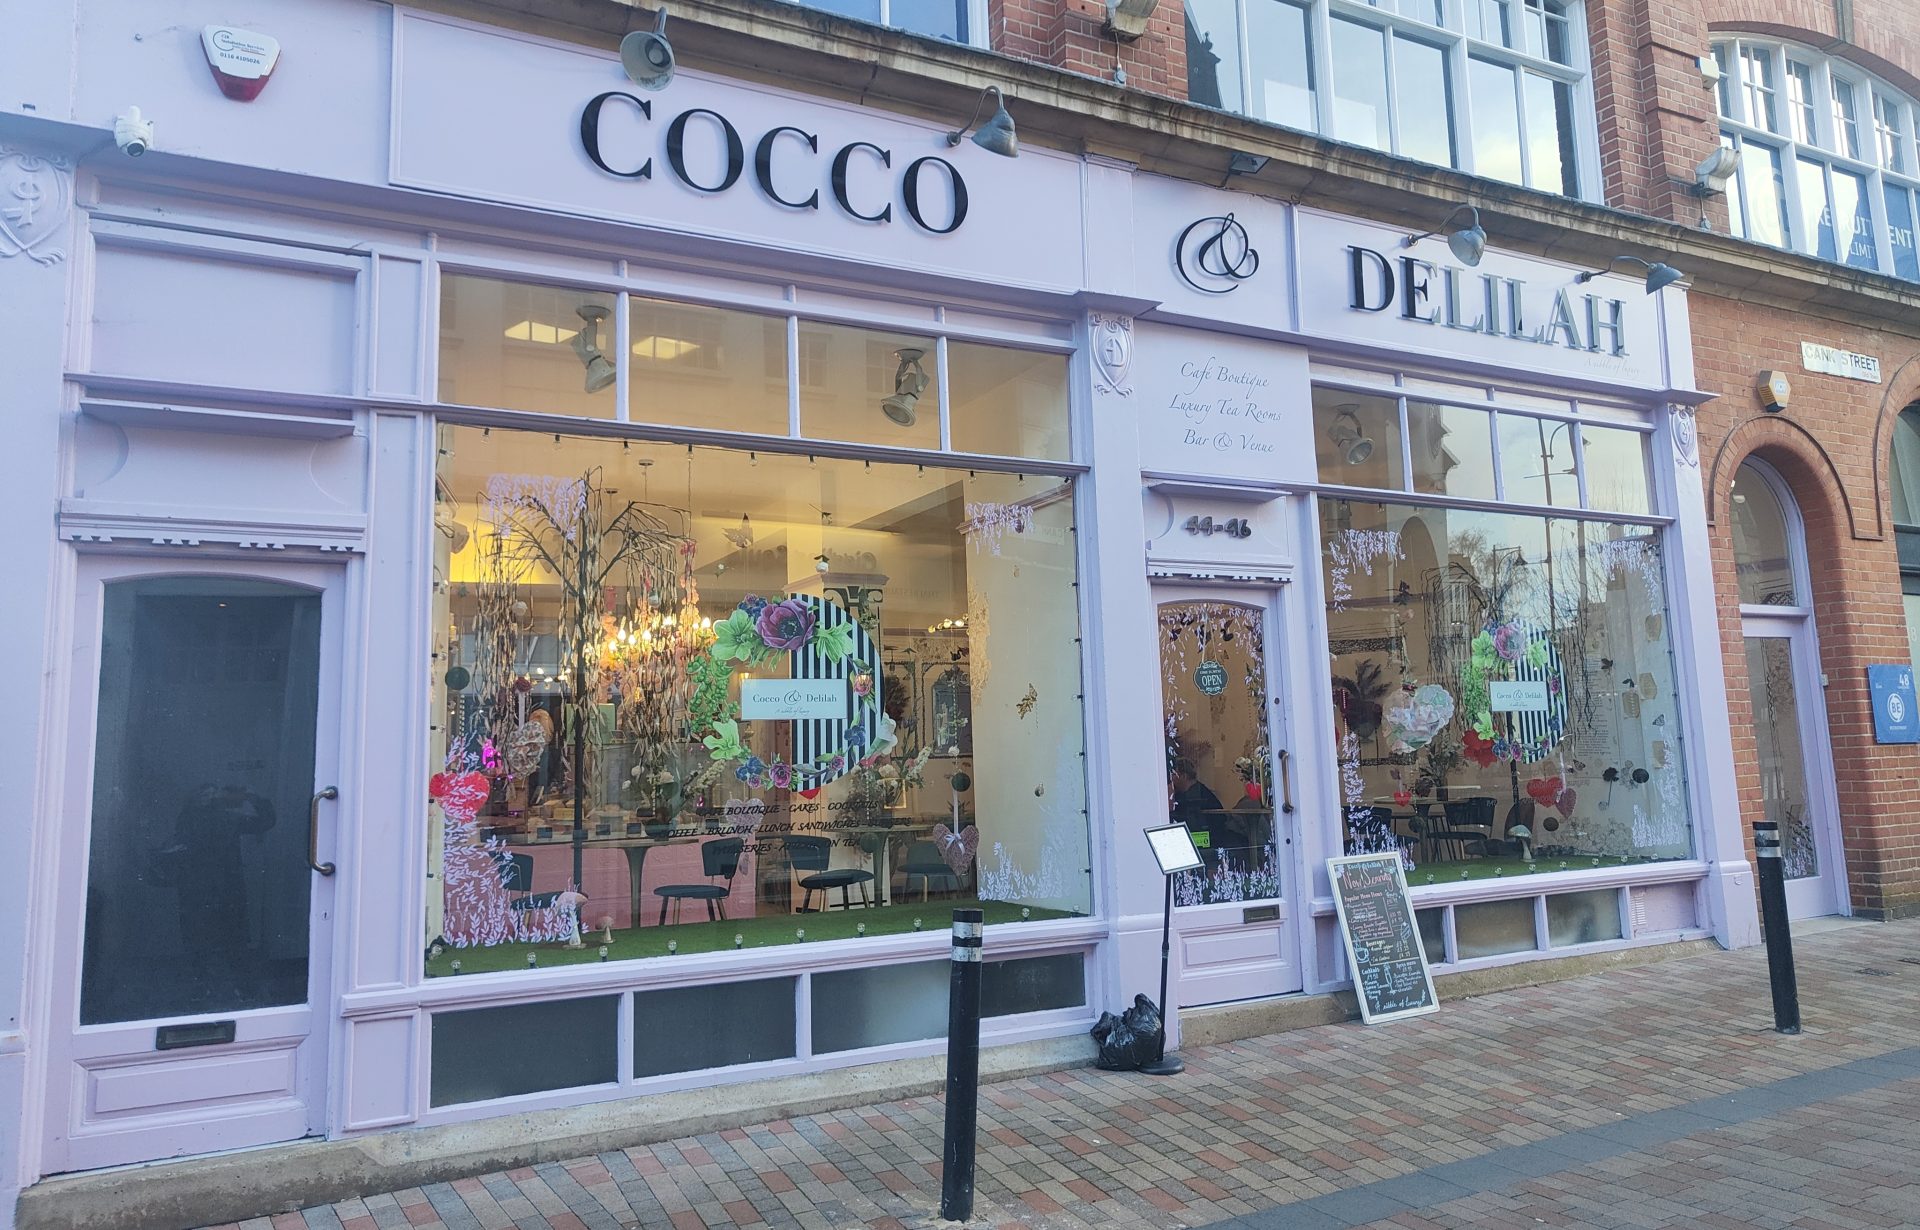 Afternoon Tea at Cocco & Delilah with Miss Leicestershire